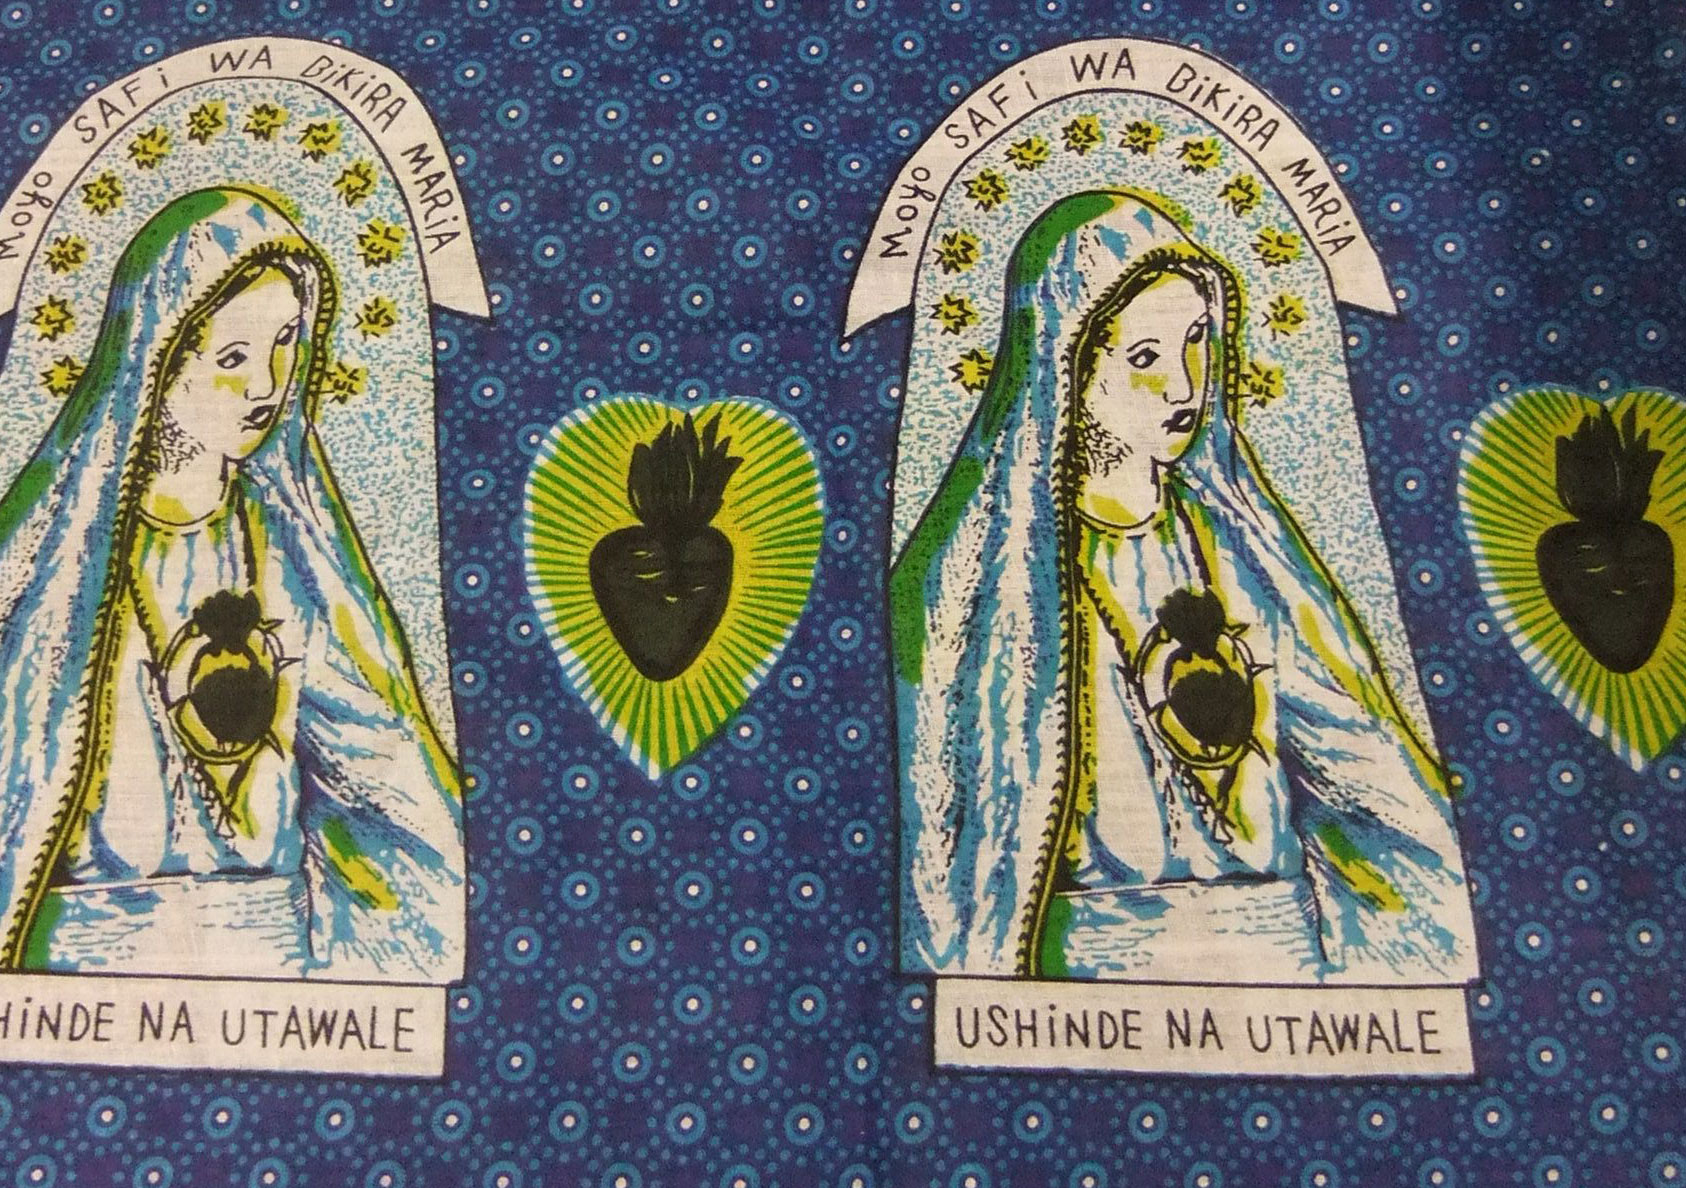 Cotton cloth printed with the Virgin Mary, commemorating the Catholic faith: Africa, Southern Africa, Zambia, Lusaka, 2010.